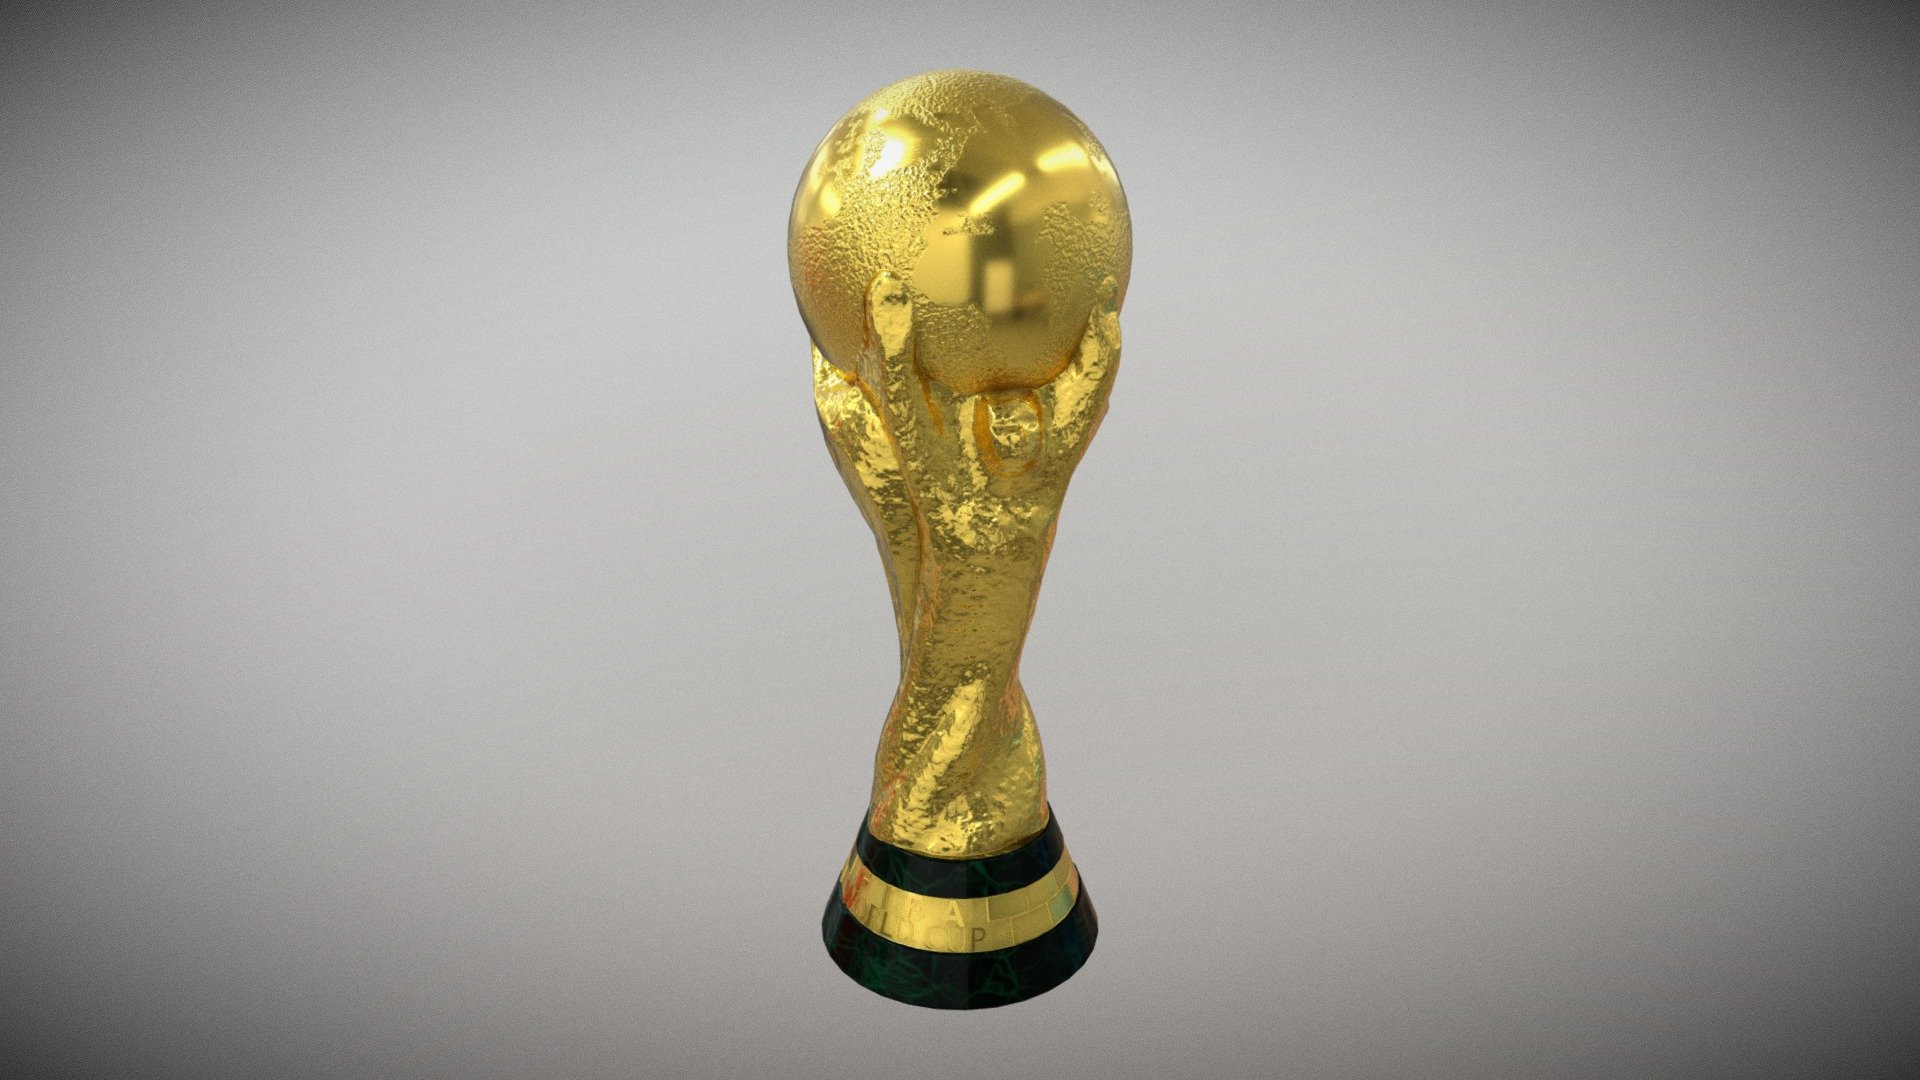 I did this trophy in maya, zbrush and substance painter 3d model